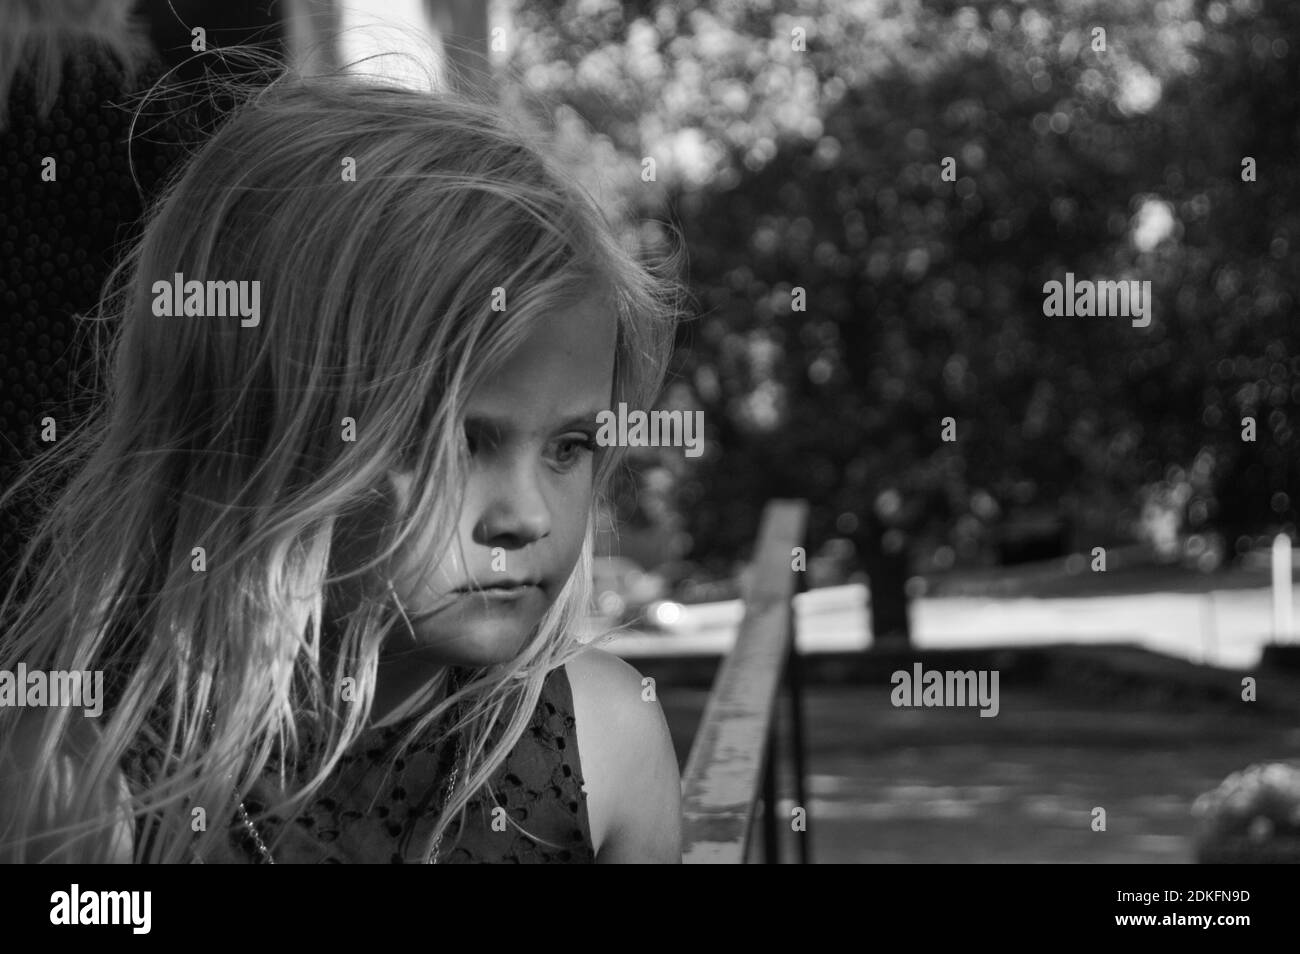 Portrait Of Girl Looking Down Stock Photo